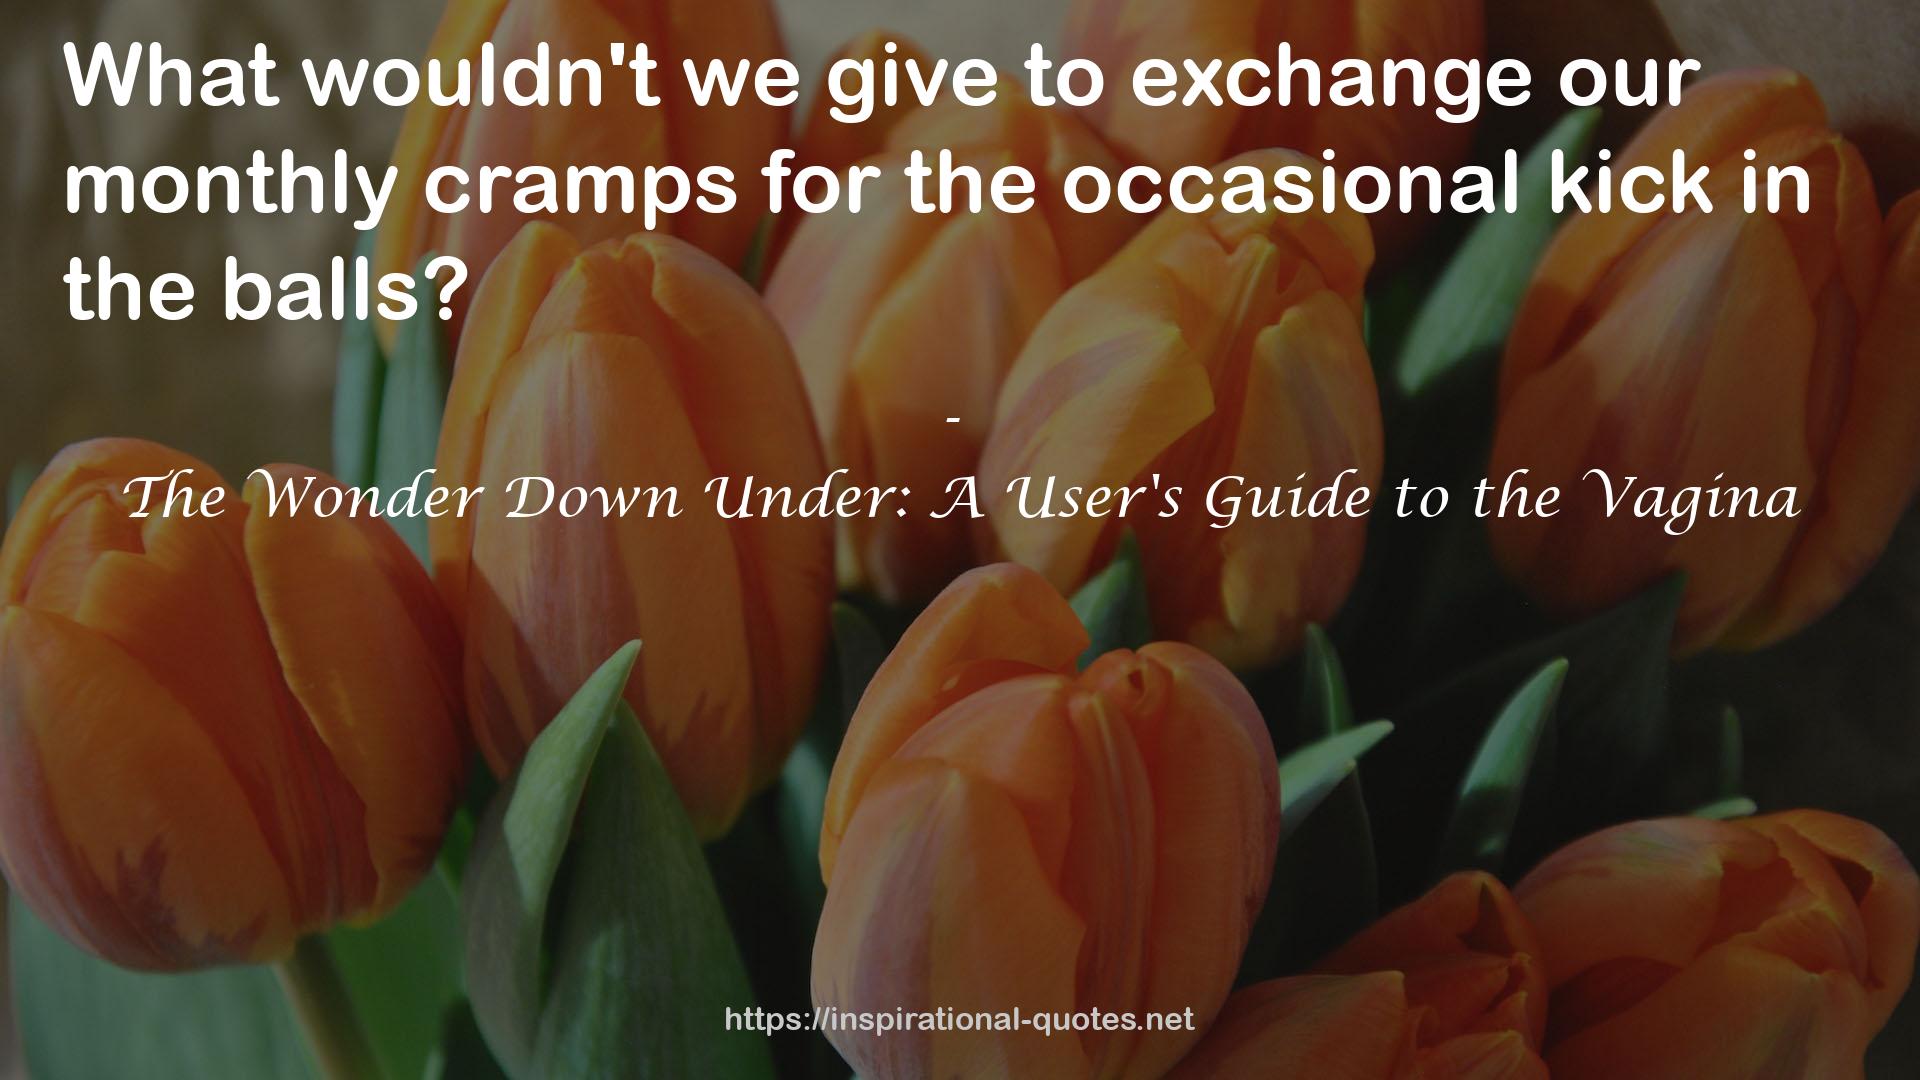 The Wonder Down Under: A User's Guide to the Vagina QUOTES